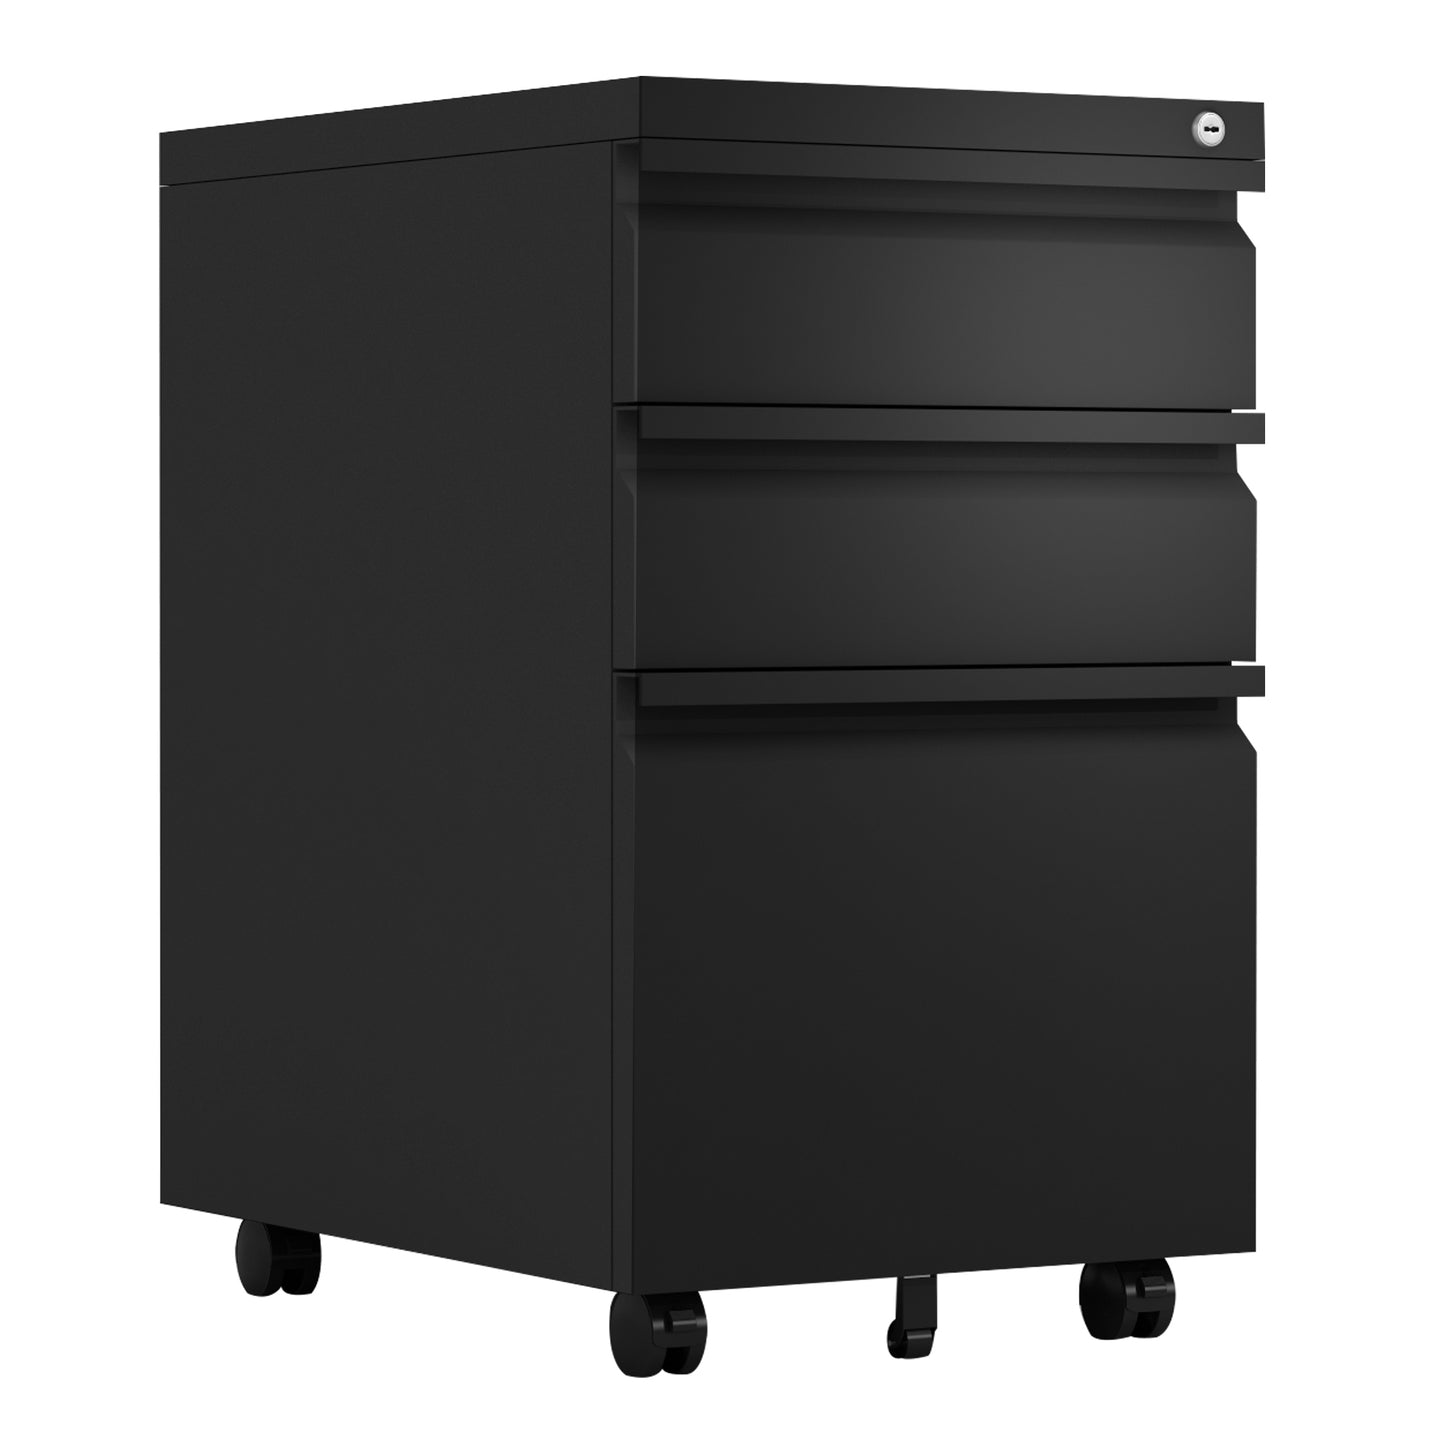 Metal mobile 3 Drawer File Cabinet with Lockable, Pedestal Cabinet Assembled for Legal or Letter Files,Used for Office and Home